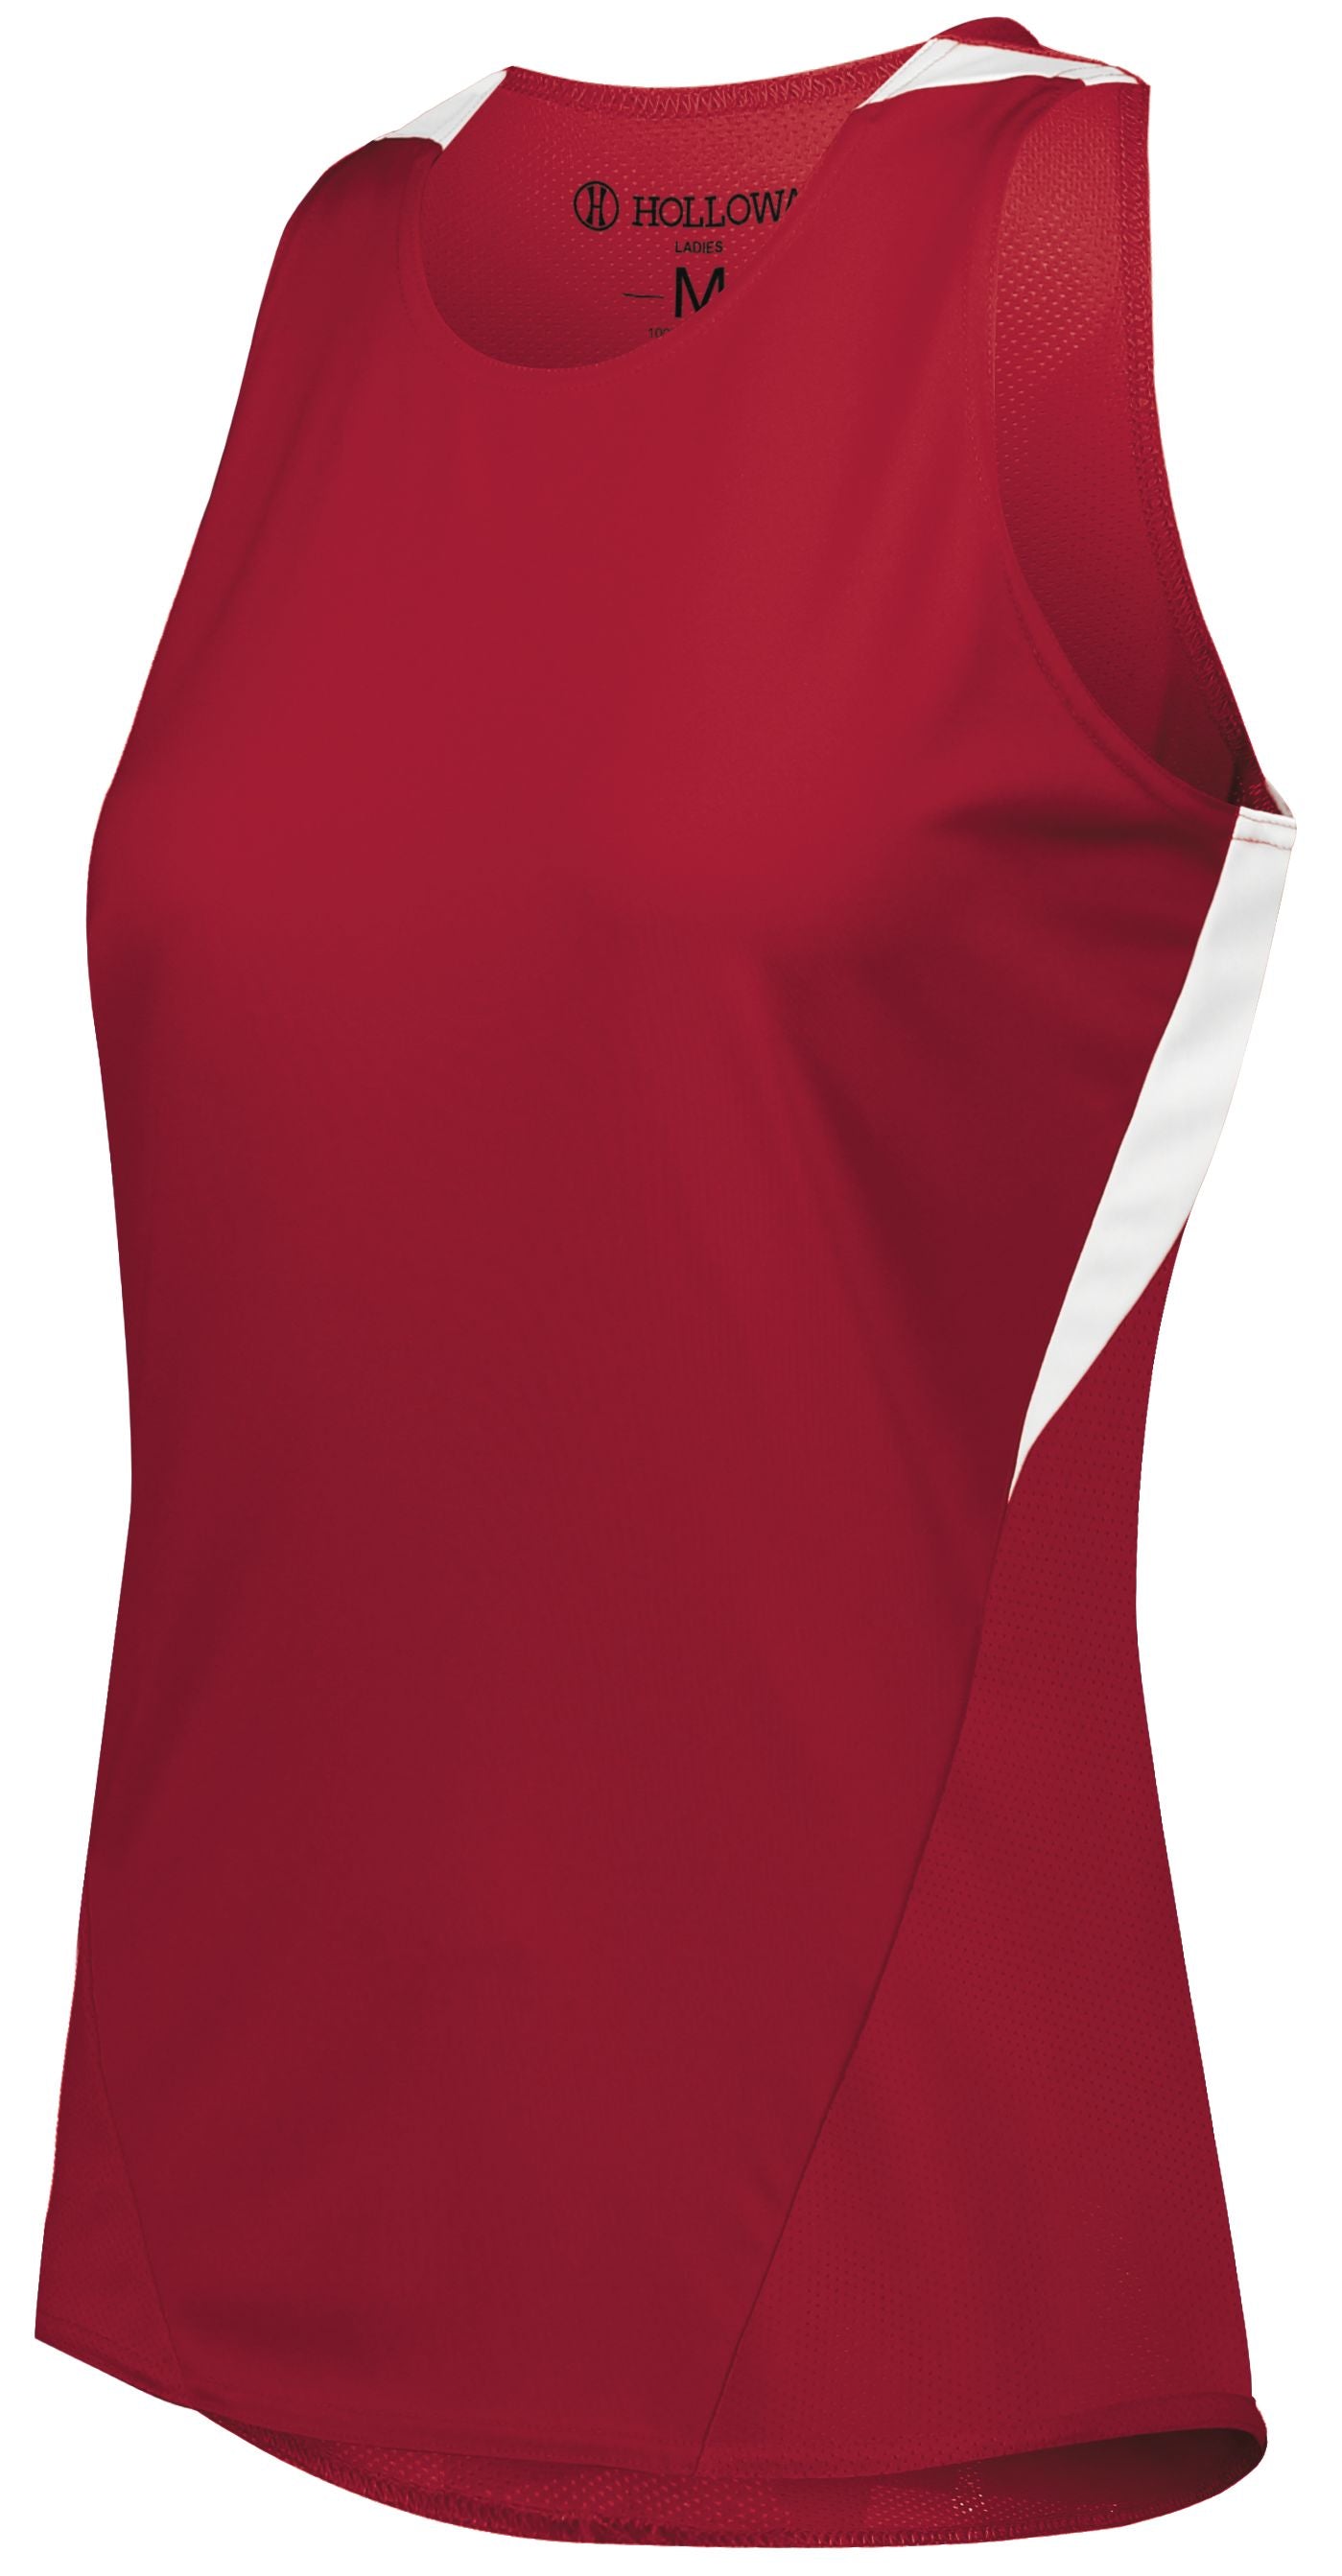 Holloway Ladies Pr Max Track Jersey in Scarlet/White  -Part of the Ladies, Ladies-Jersey, Track-Field, Holloway, Shirts product lines at KanaleyCreations.com